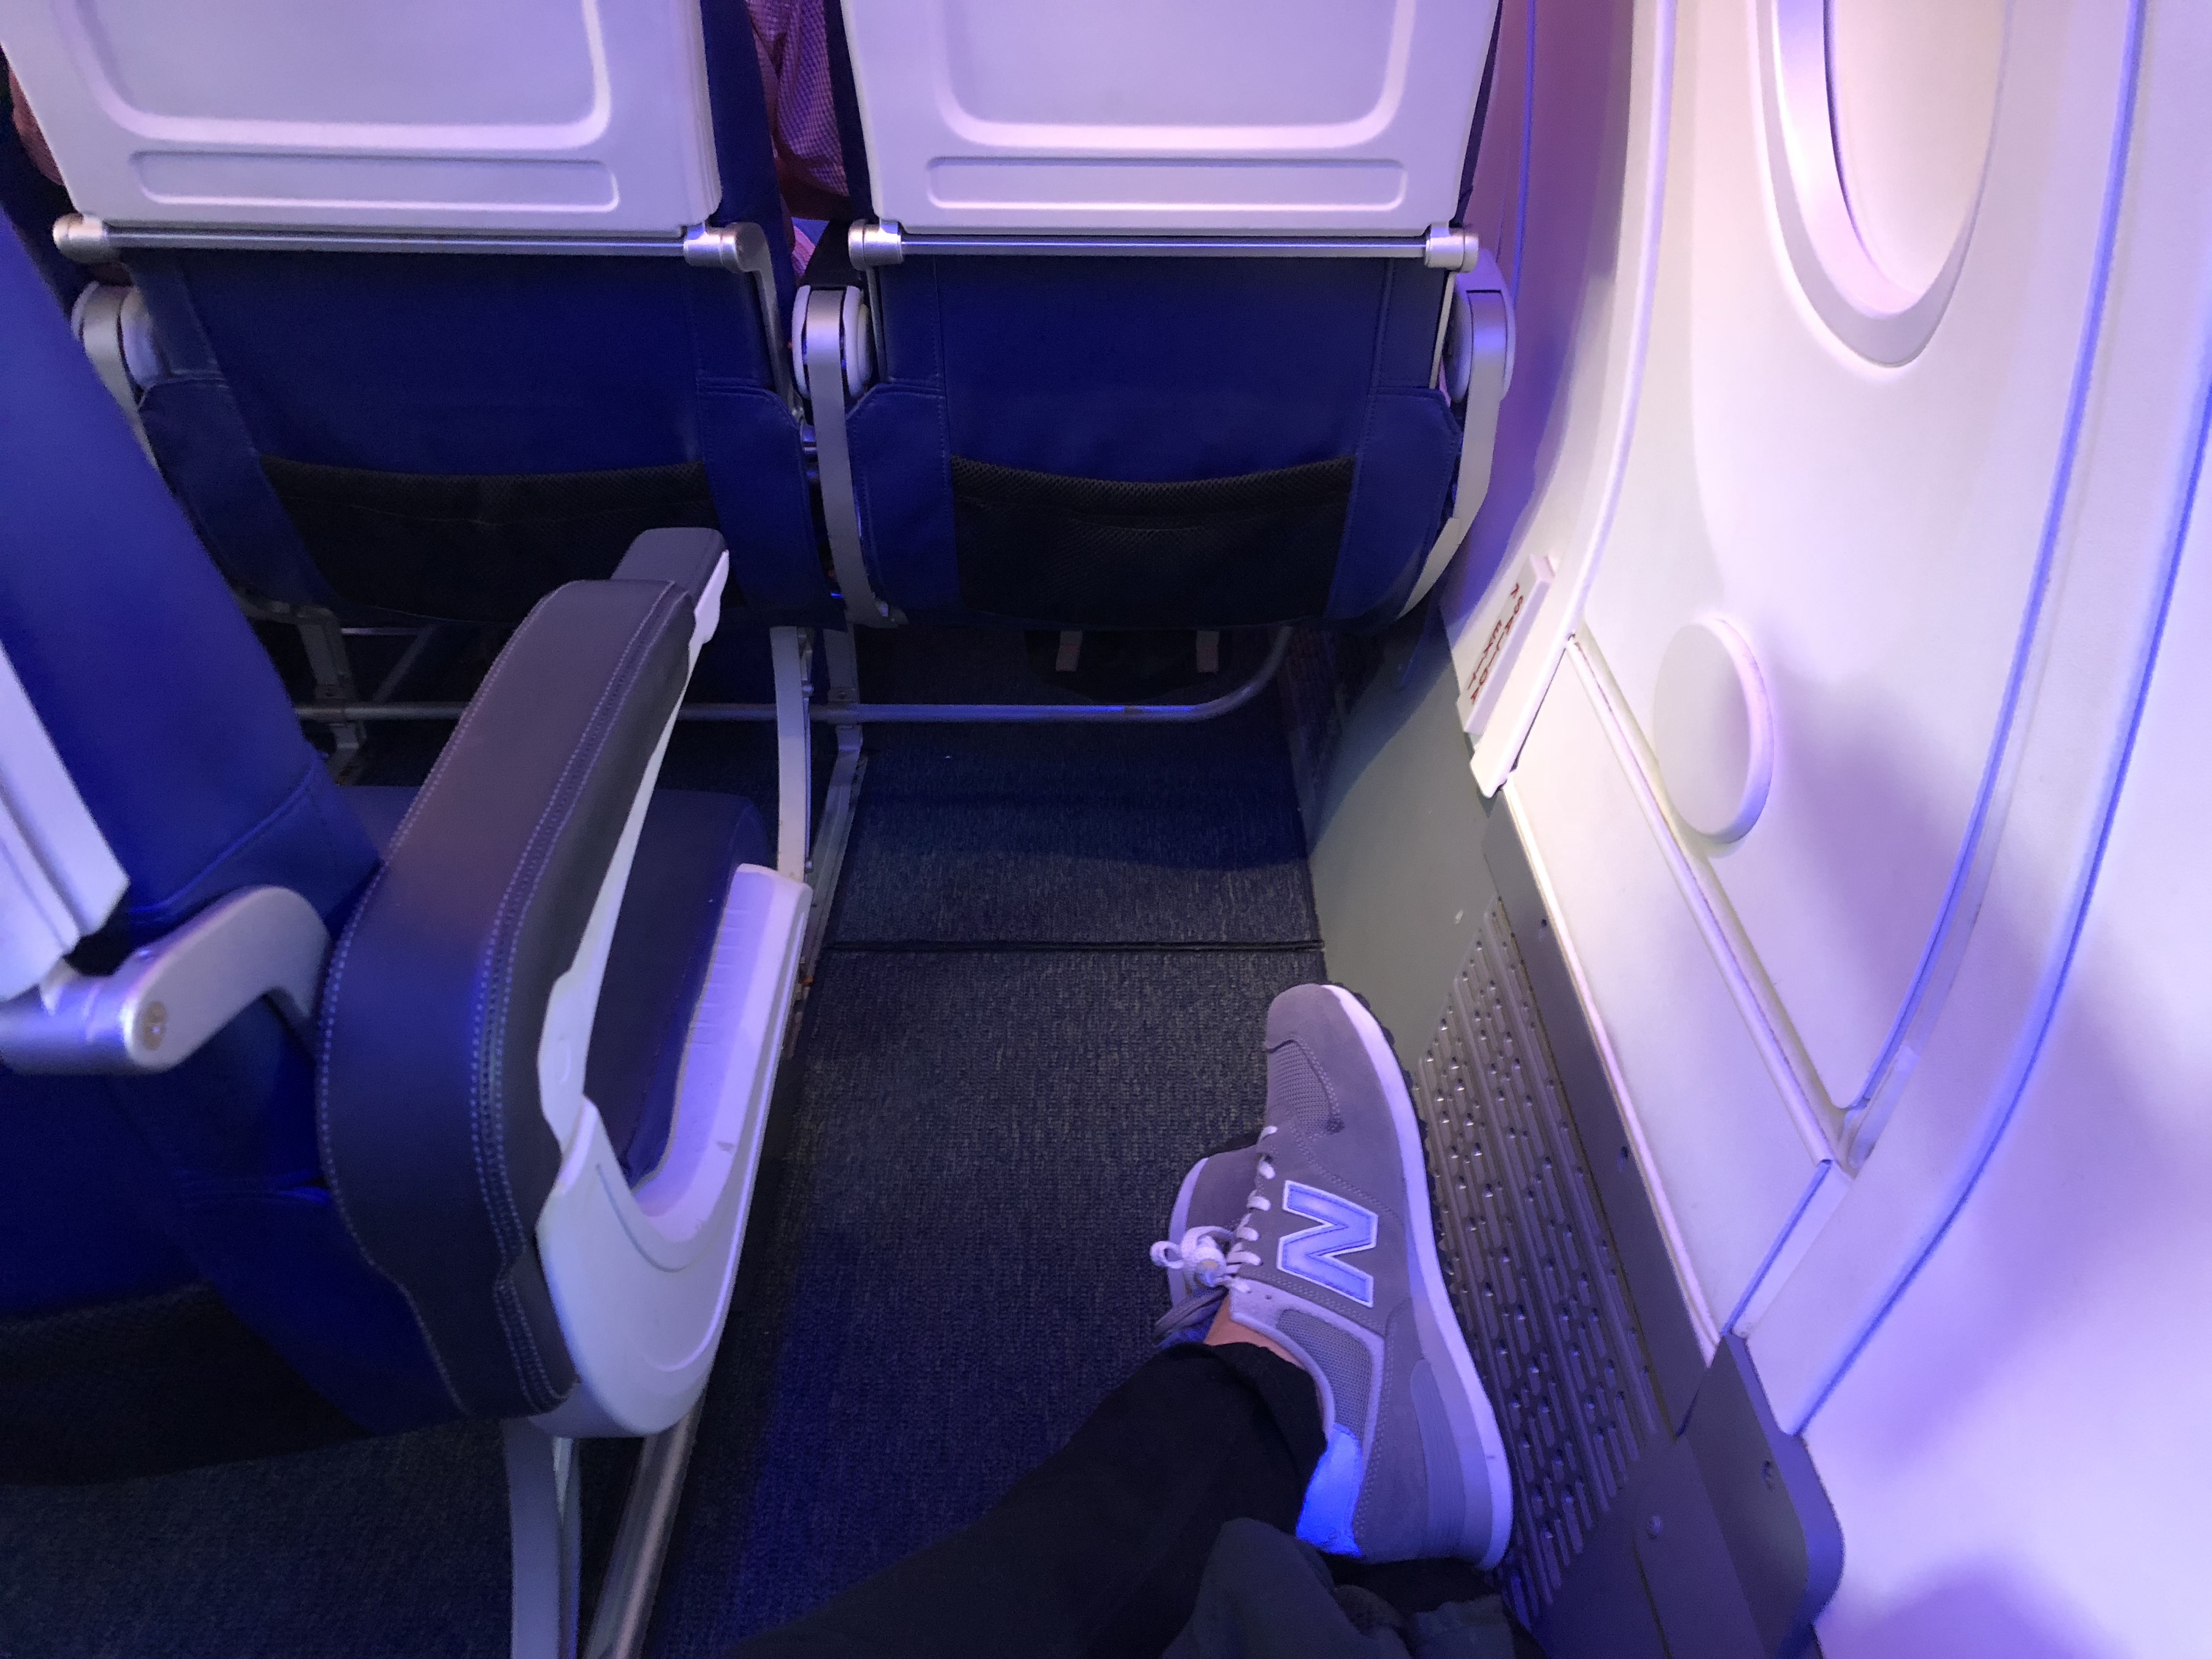 Southwest Airlines Boeing 737 MAX Legroom at 16F